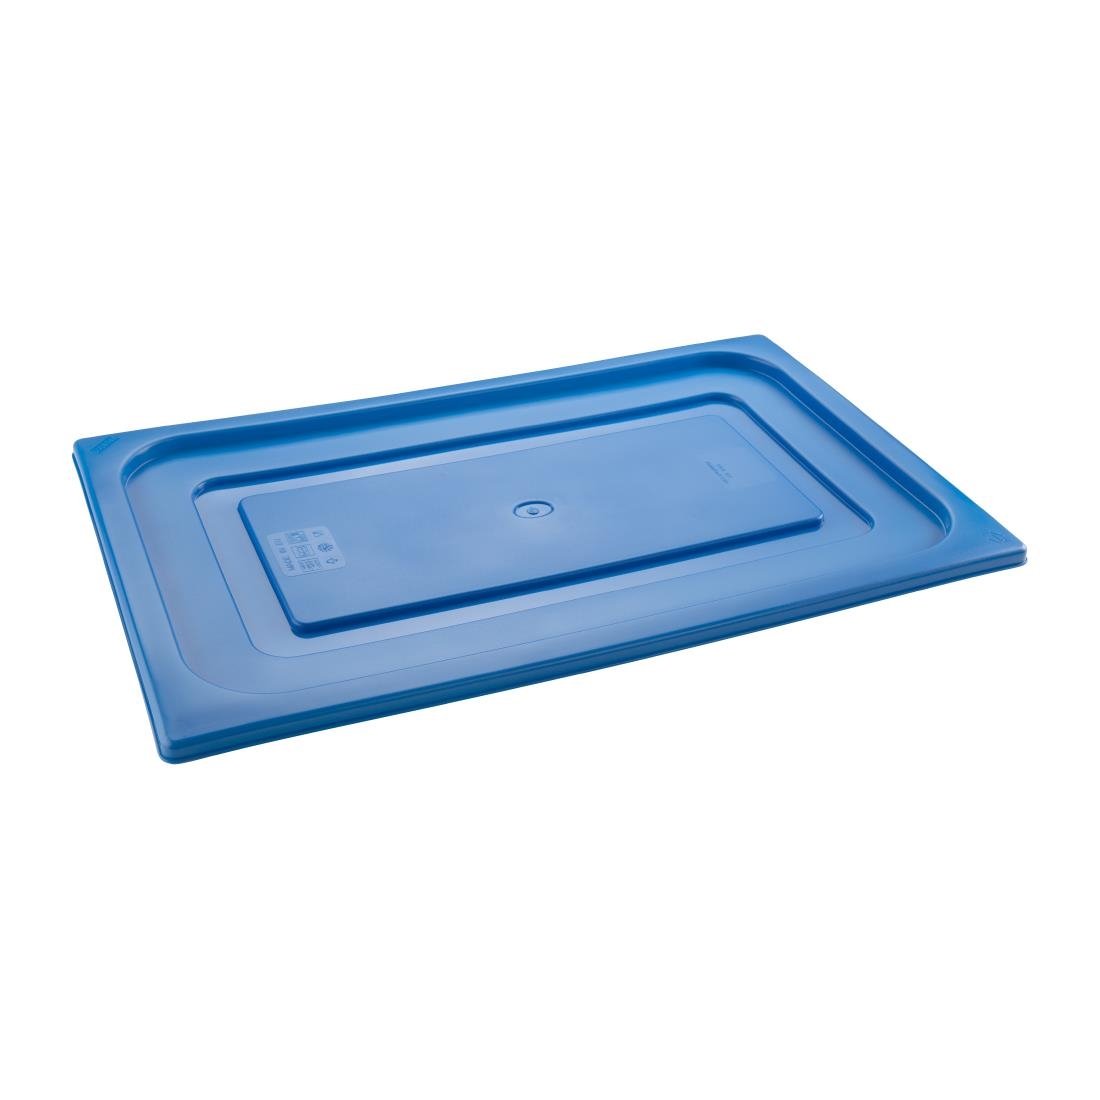 HT899 Pujadas Blue Polinorm Gastronorm Lid 1/9GN